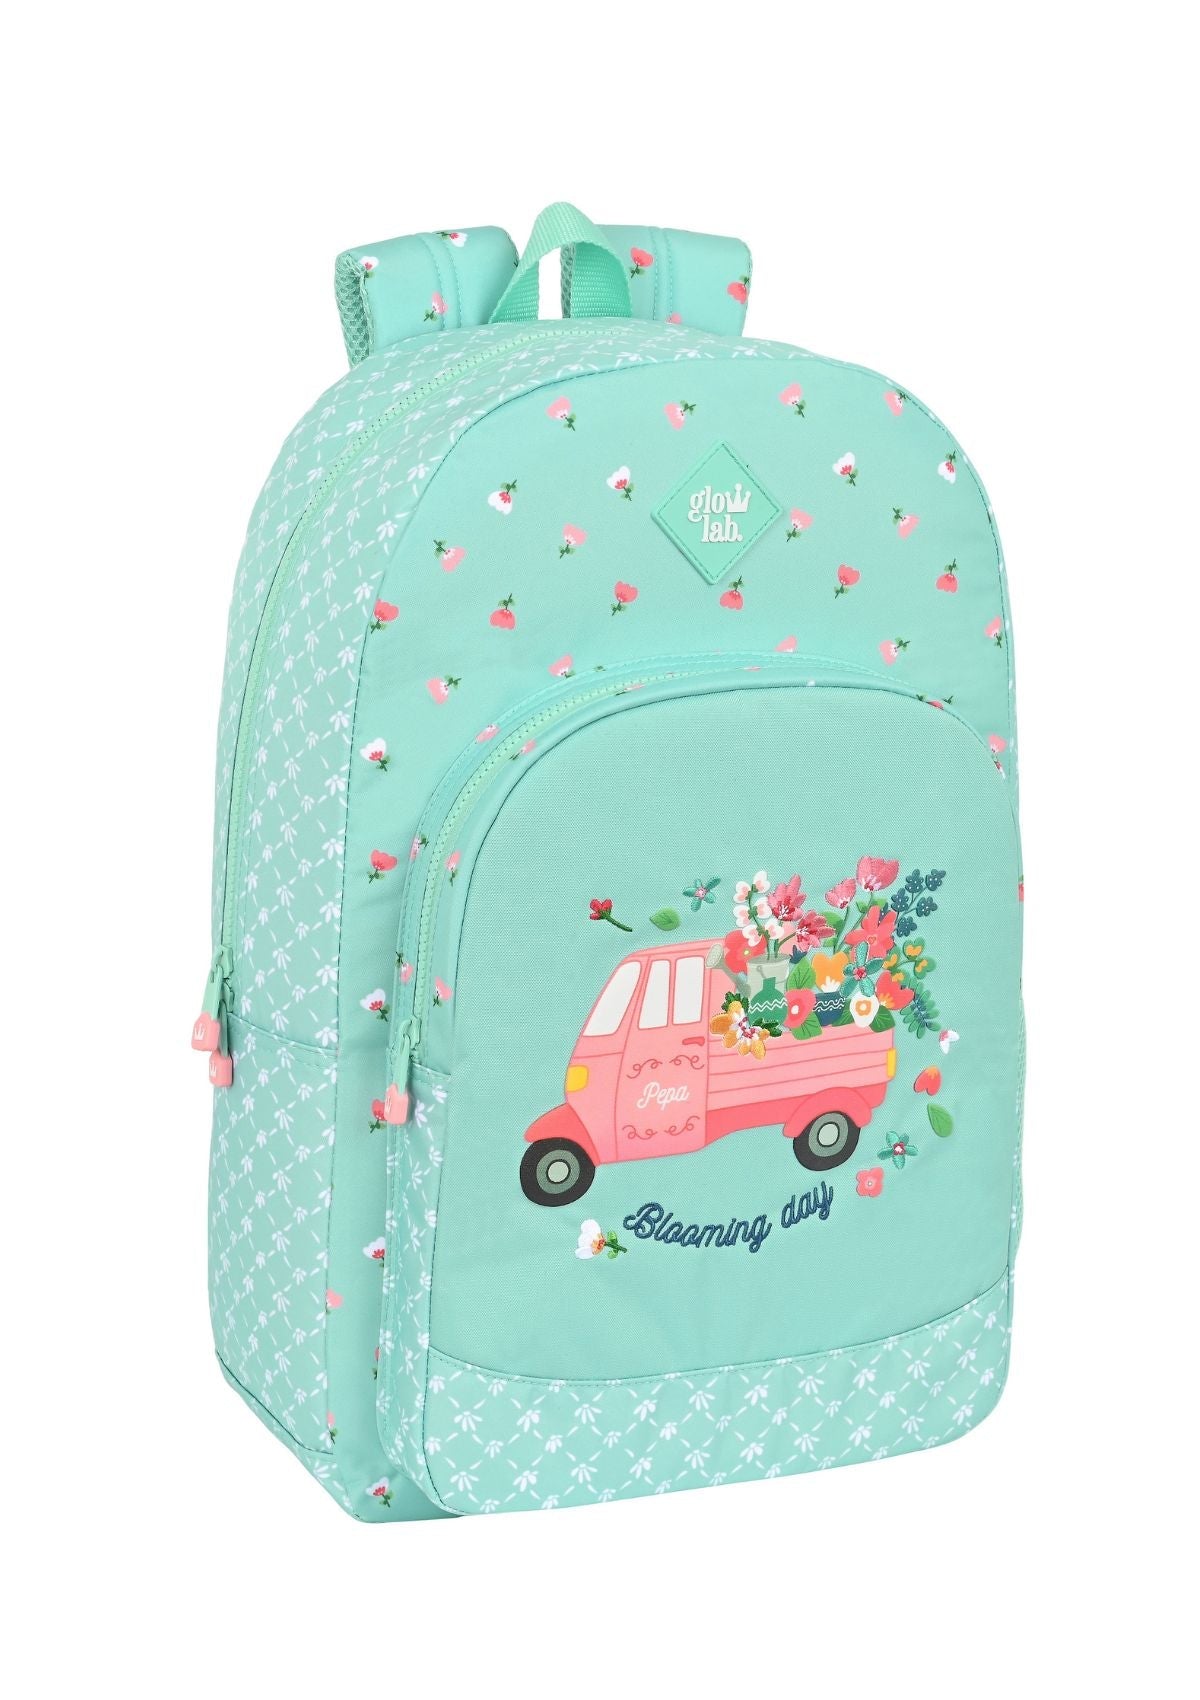 Glowlab Blooming Day Large Backpack